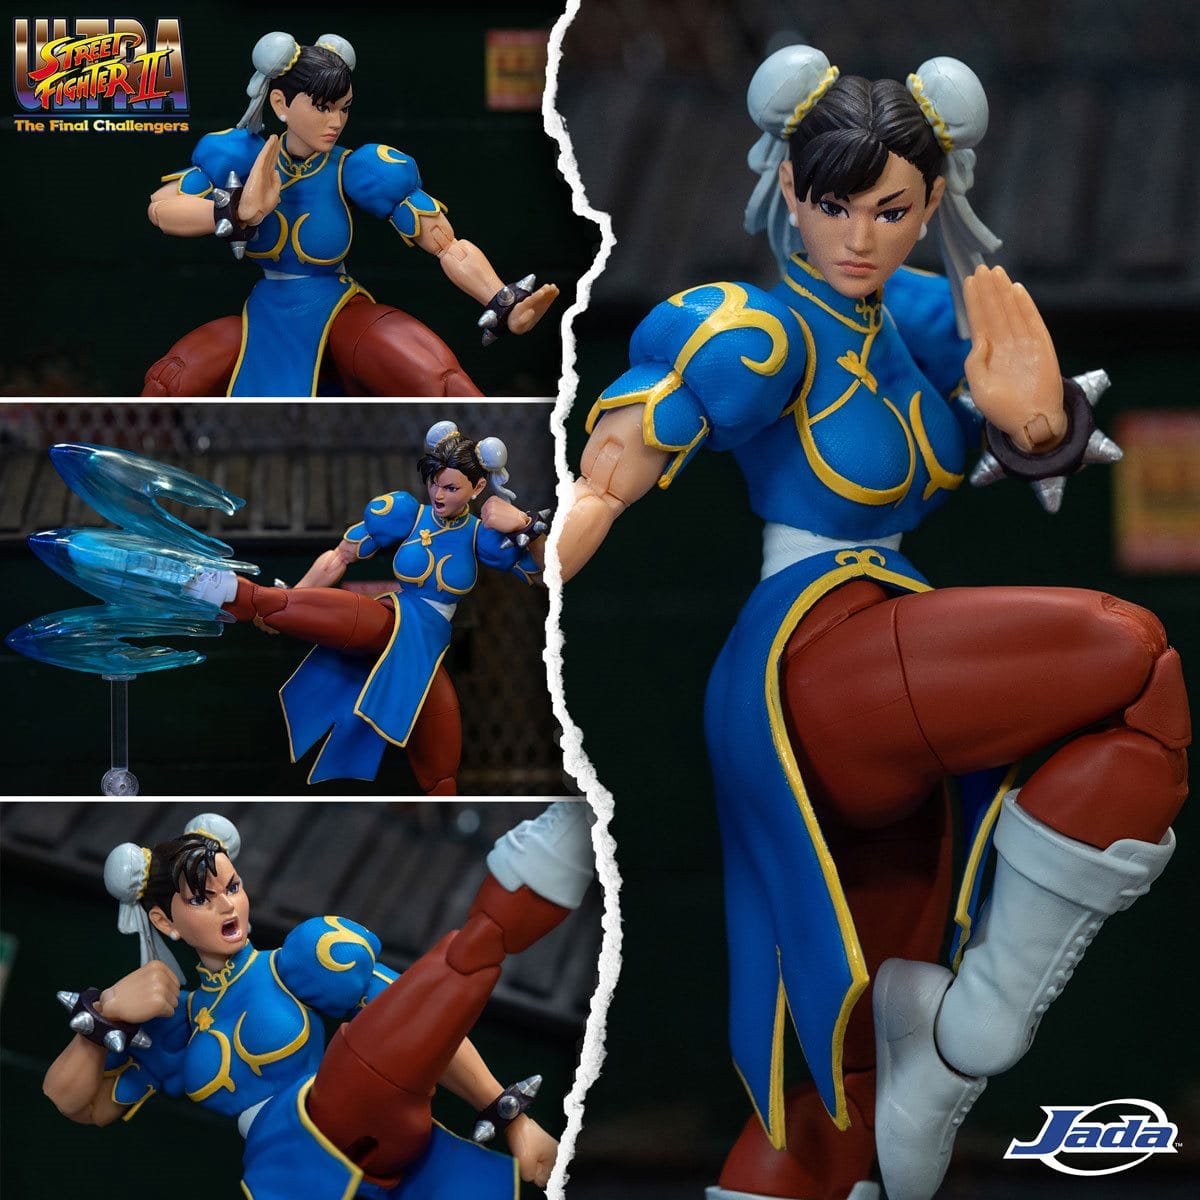 Jada Toys Street Fighter figures at SDCC 2022 by IAmAutism on